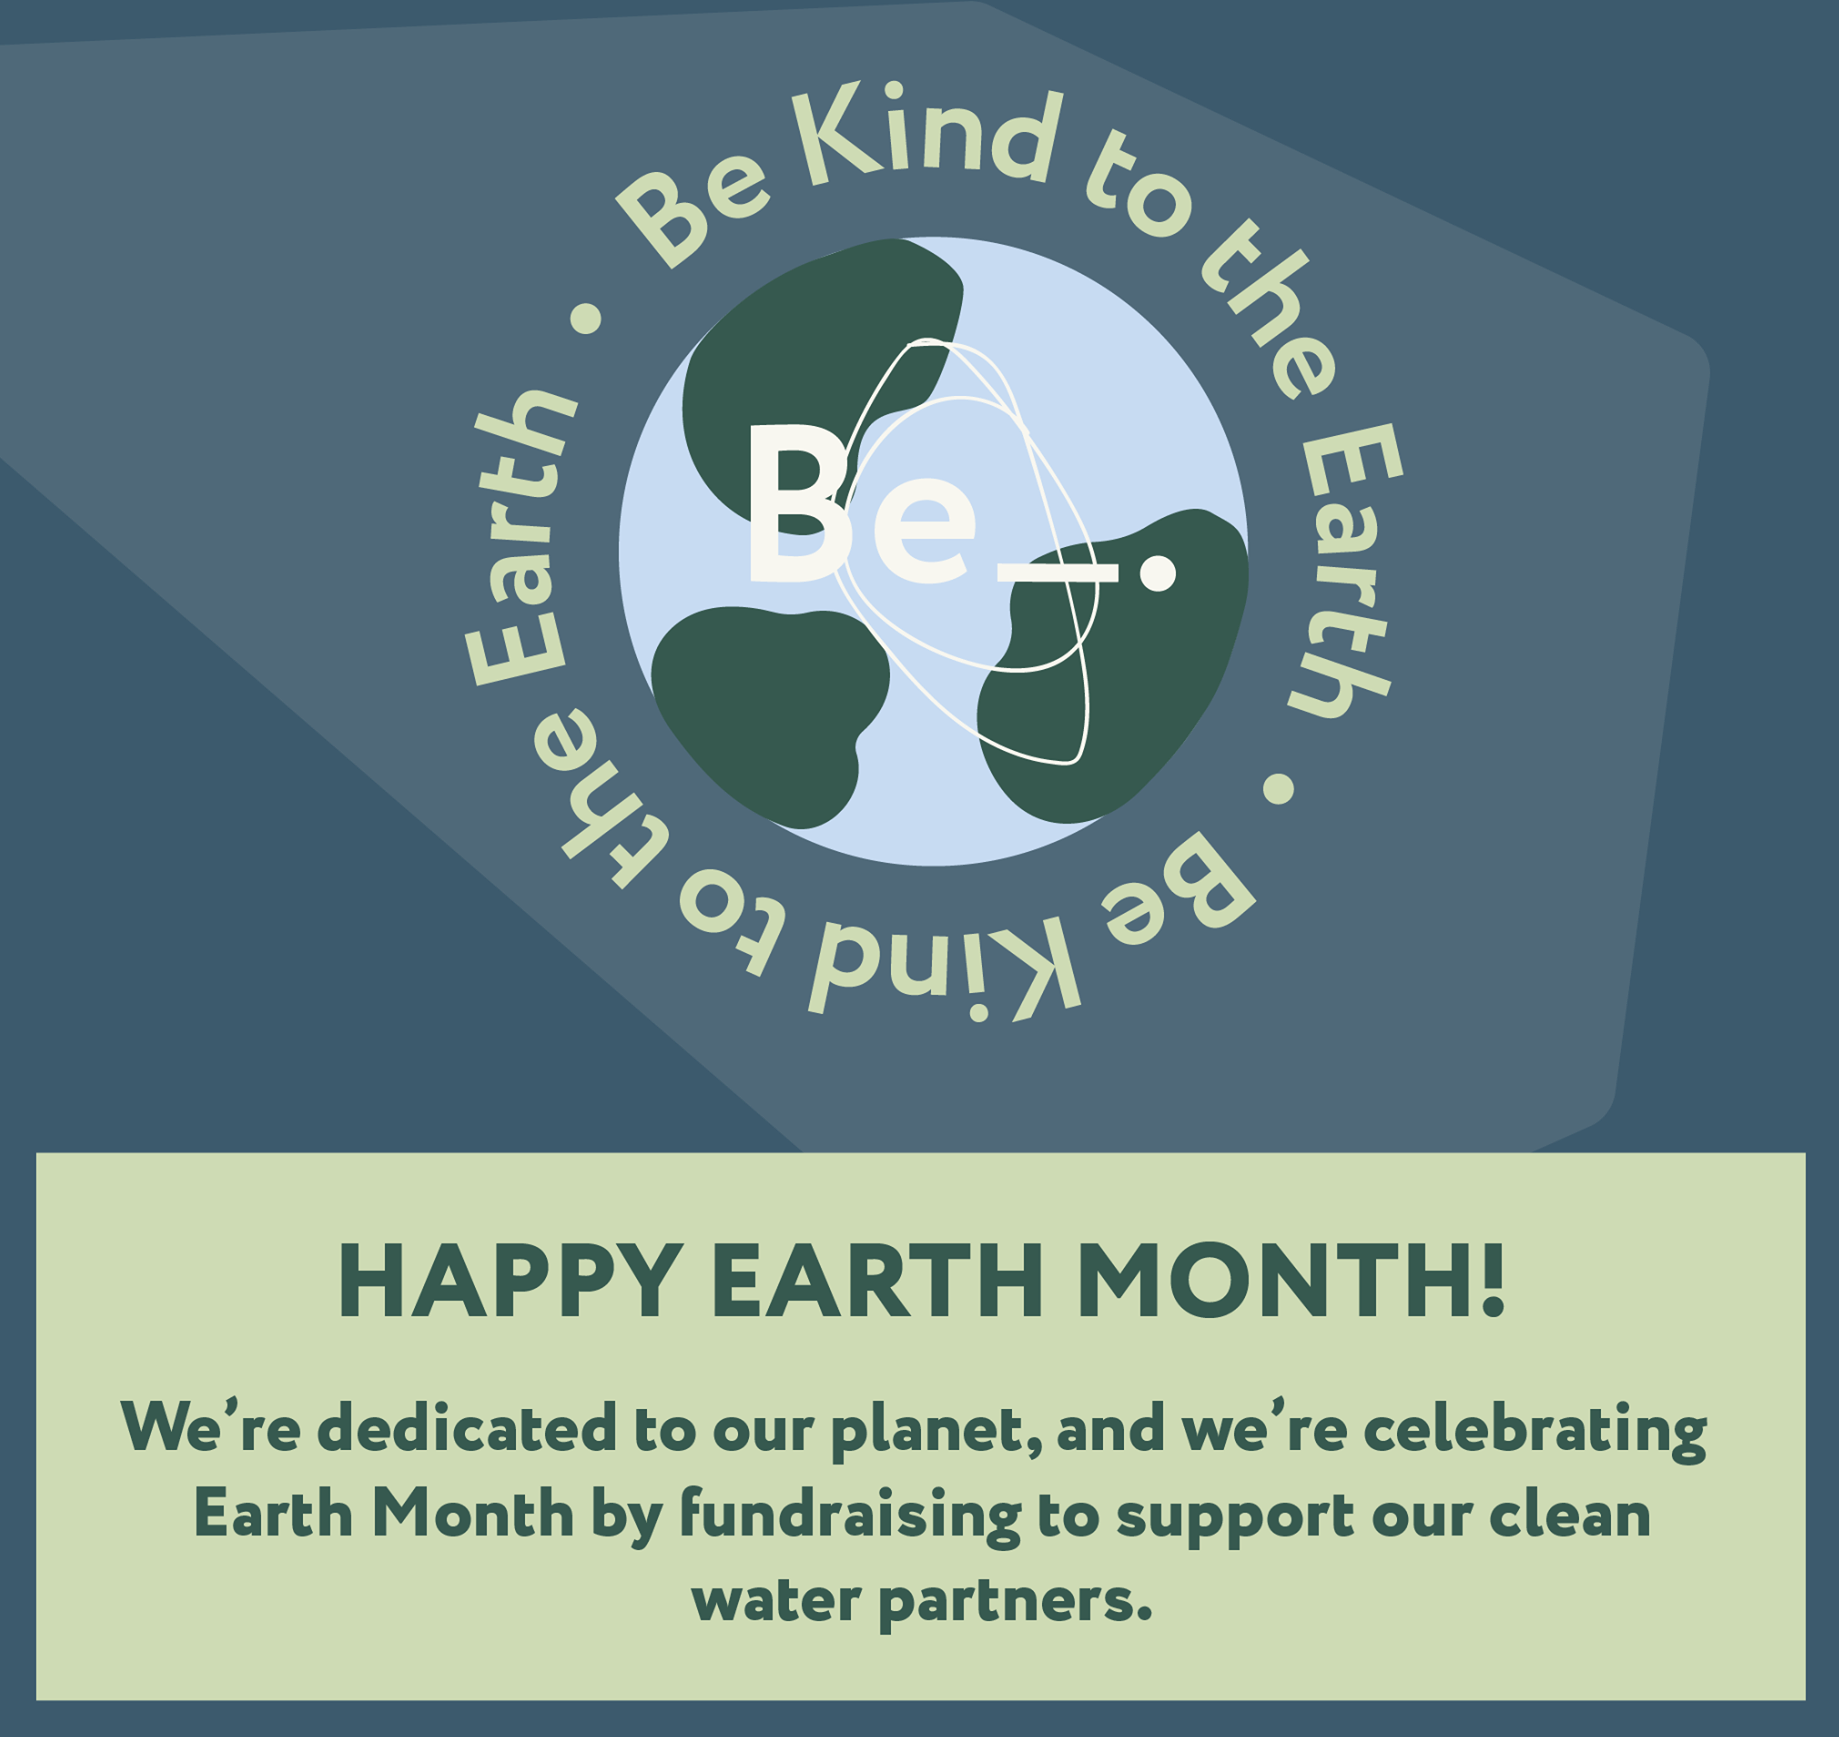 3 Ways Be Aveda Cares for the Earth